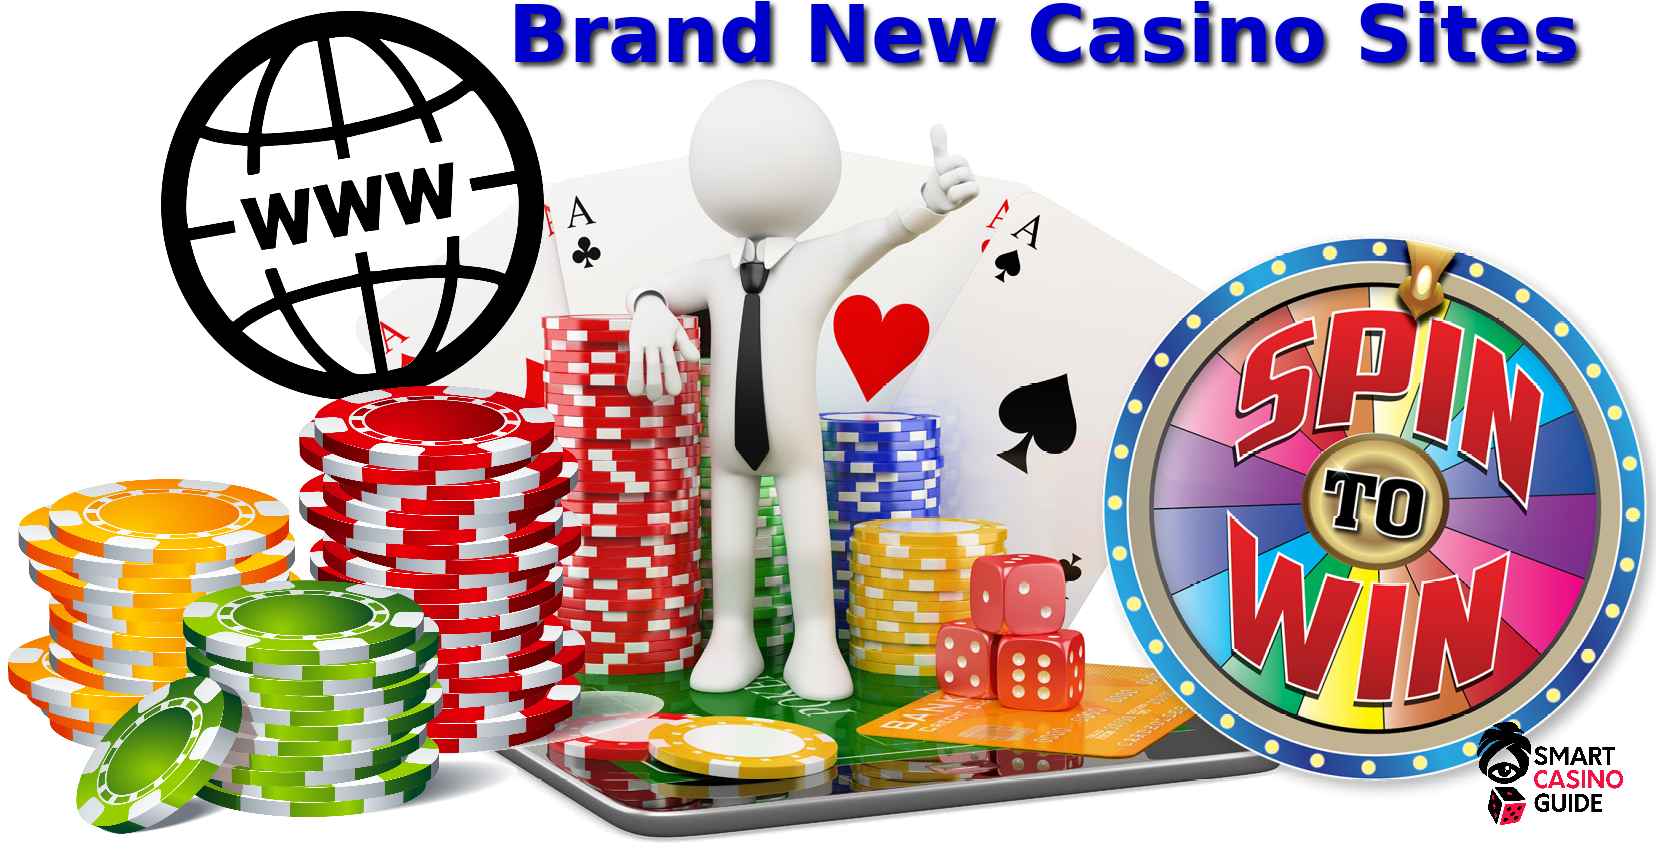 How To Make Your latest opened casino sites Look Like A Million Bucks